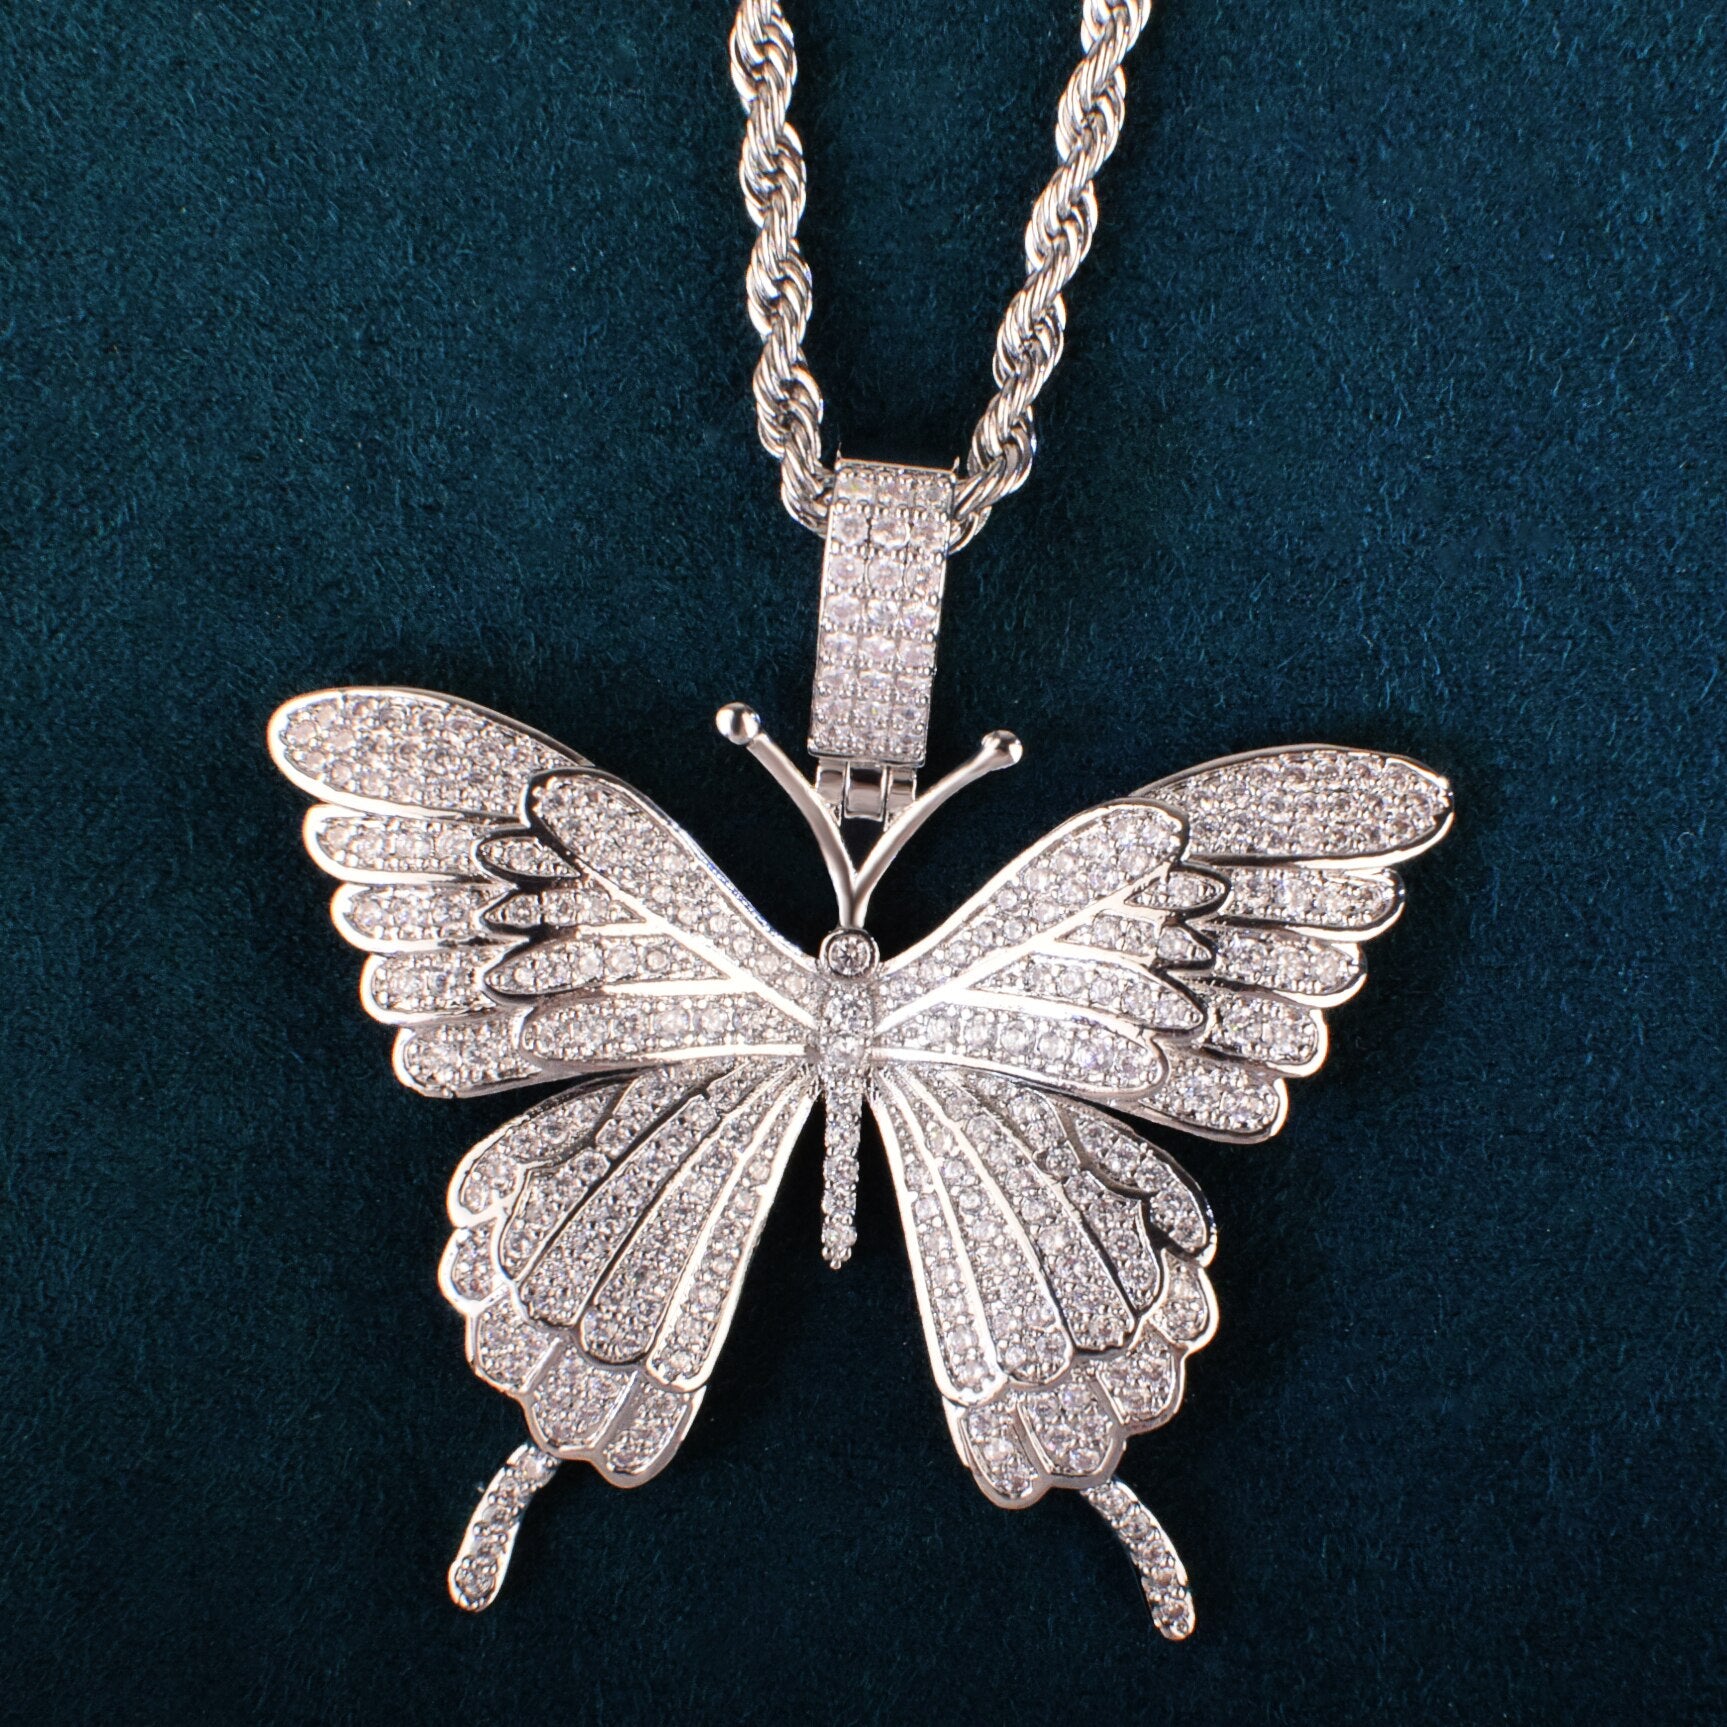 Butterfly Wing Pendant | Butterfly Pendant for Necklaces | Hip Hop Jewelry Pendants